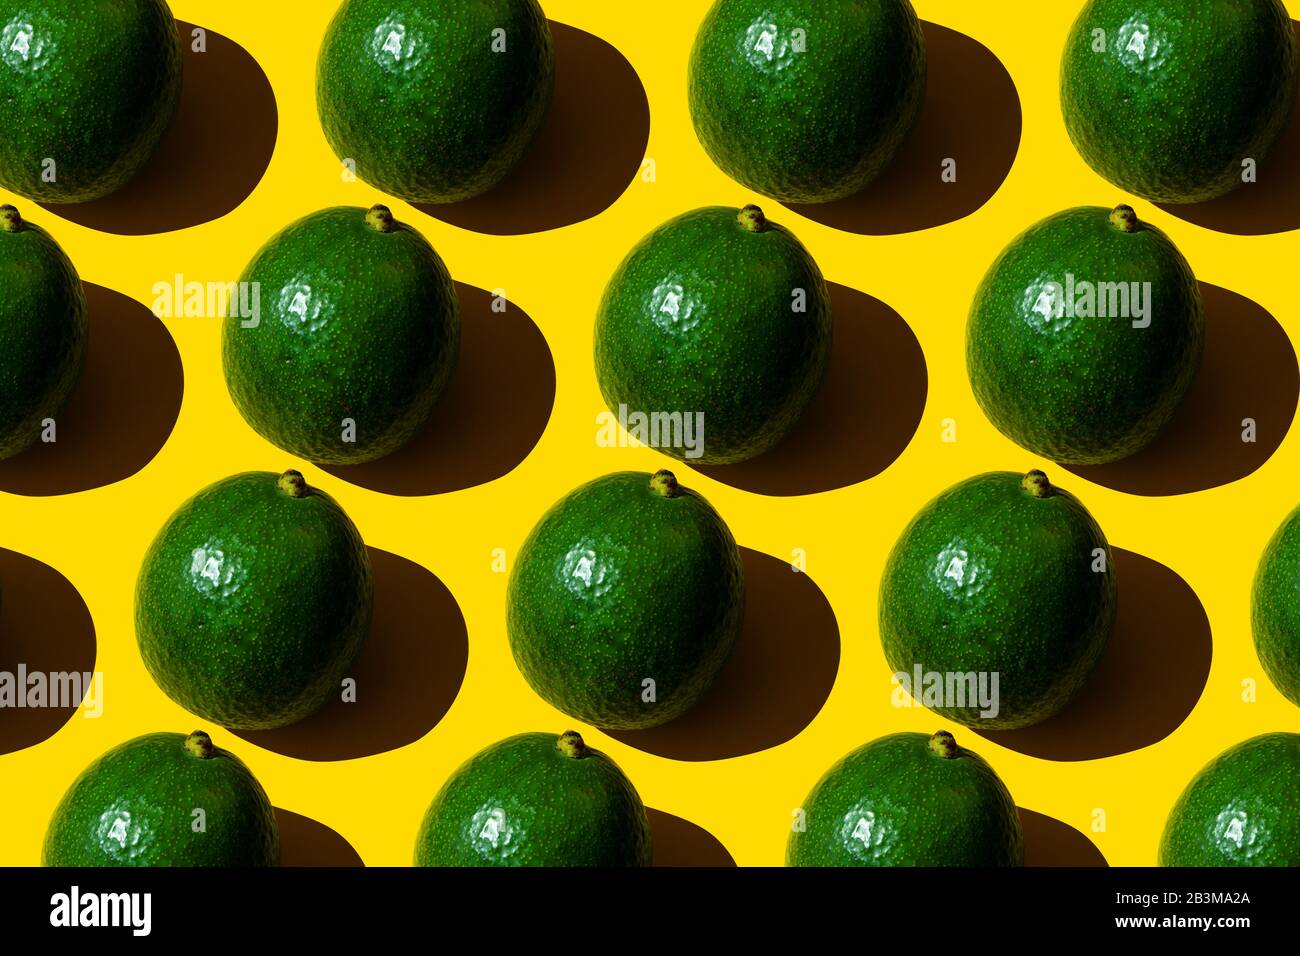 Avocado pattern on yellow background. Top view. Stock Photo